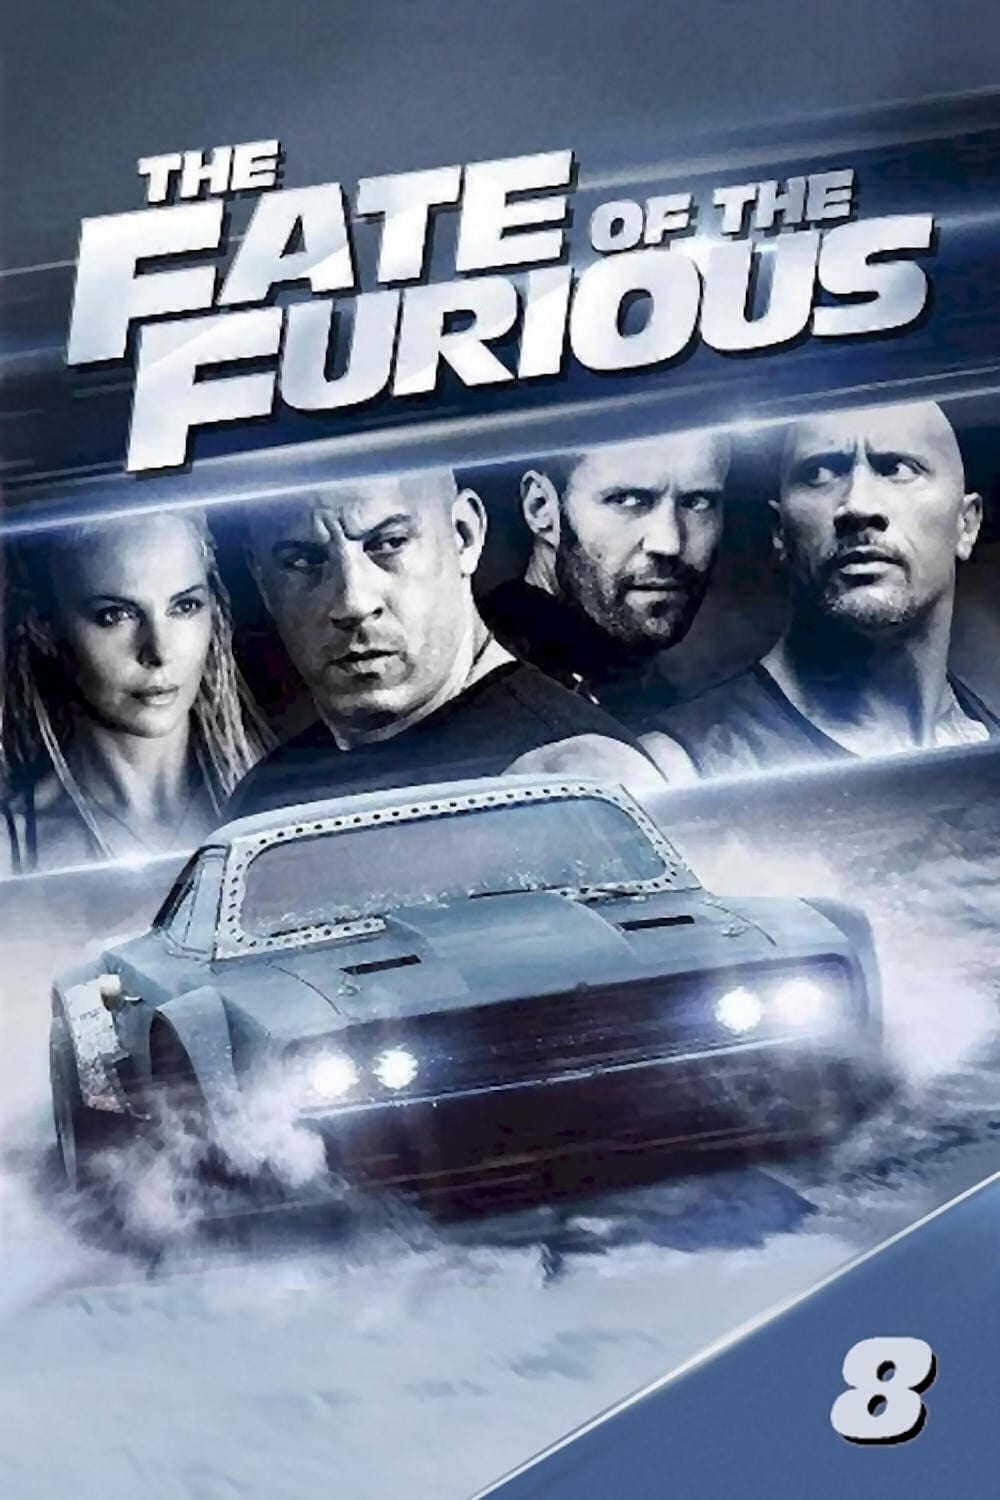 Poster Fast & Furious 8